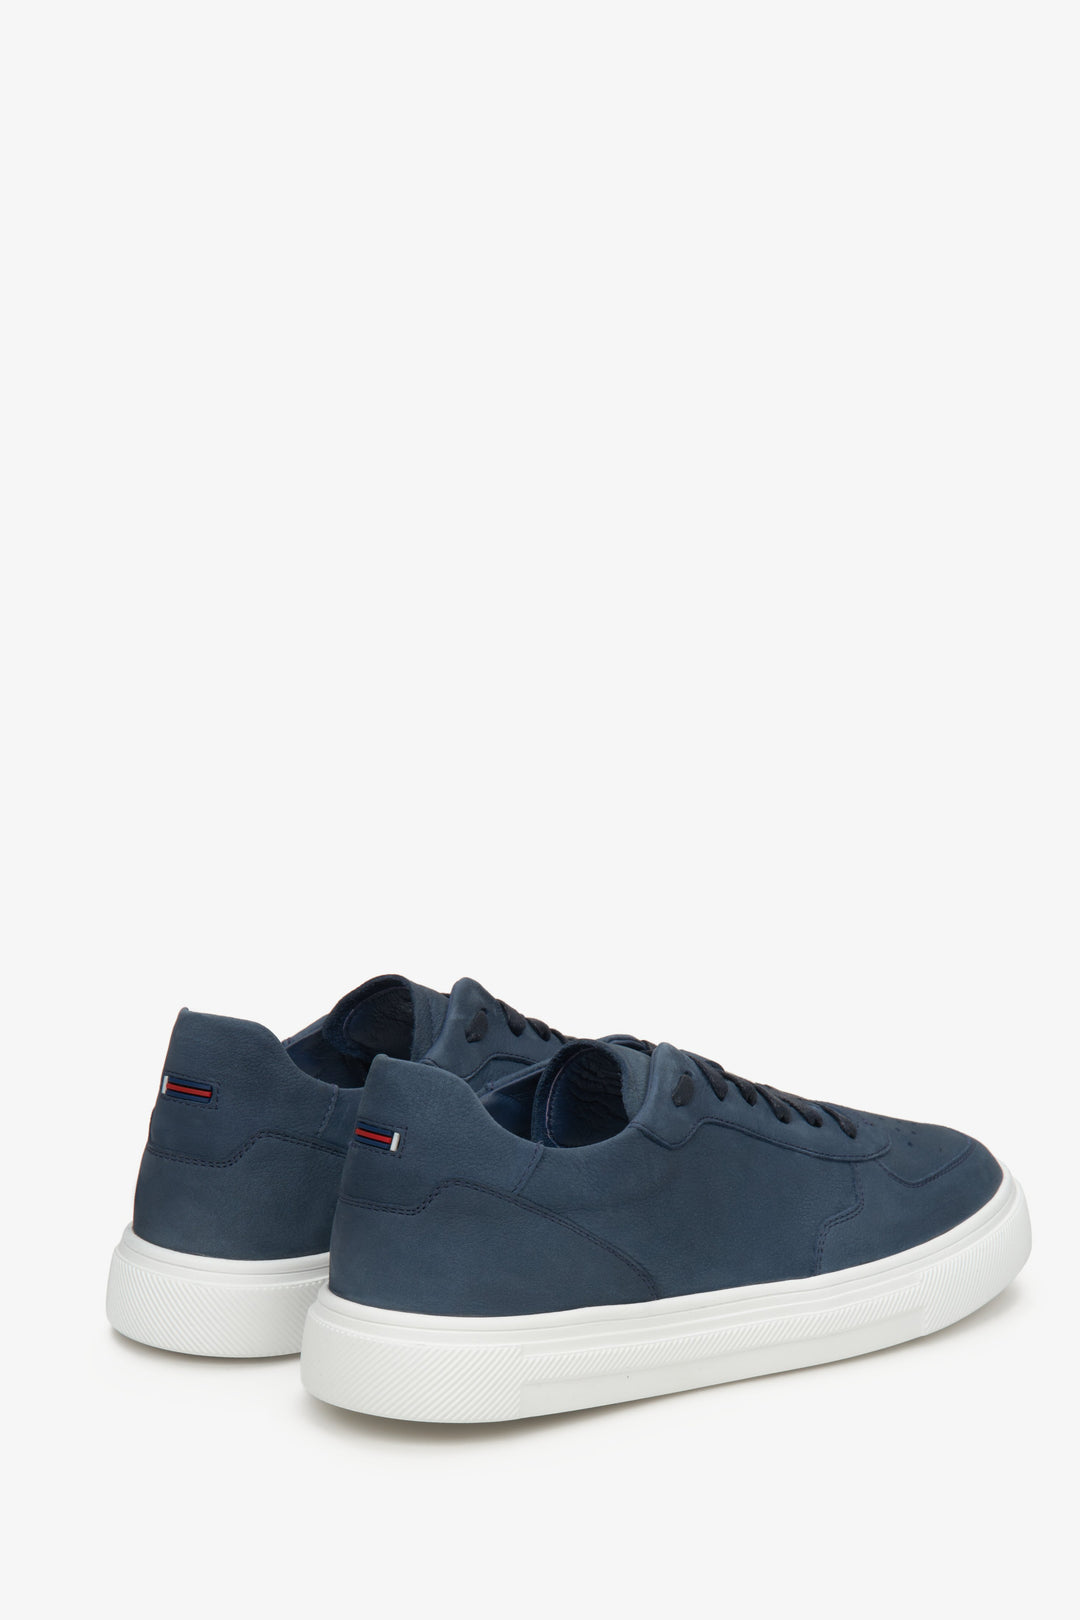 Men's blue sneakers made of genuine nubuck by Estro - presentation of the side seam and heel of the shoe.